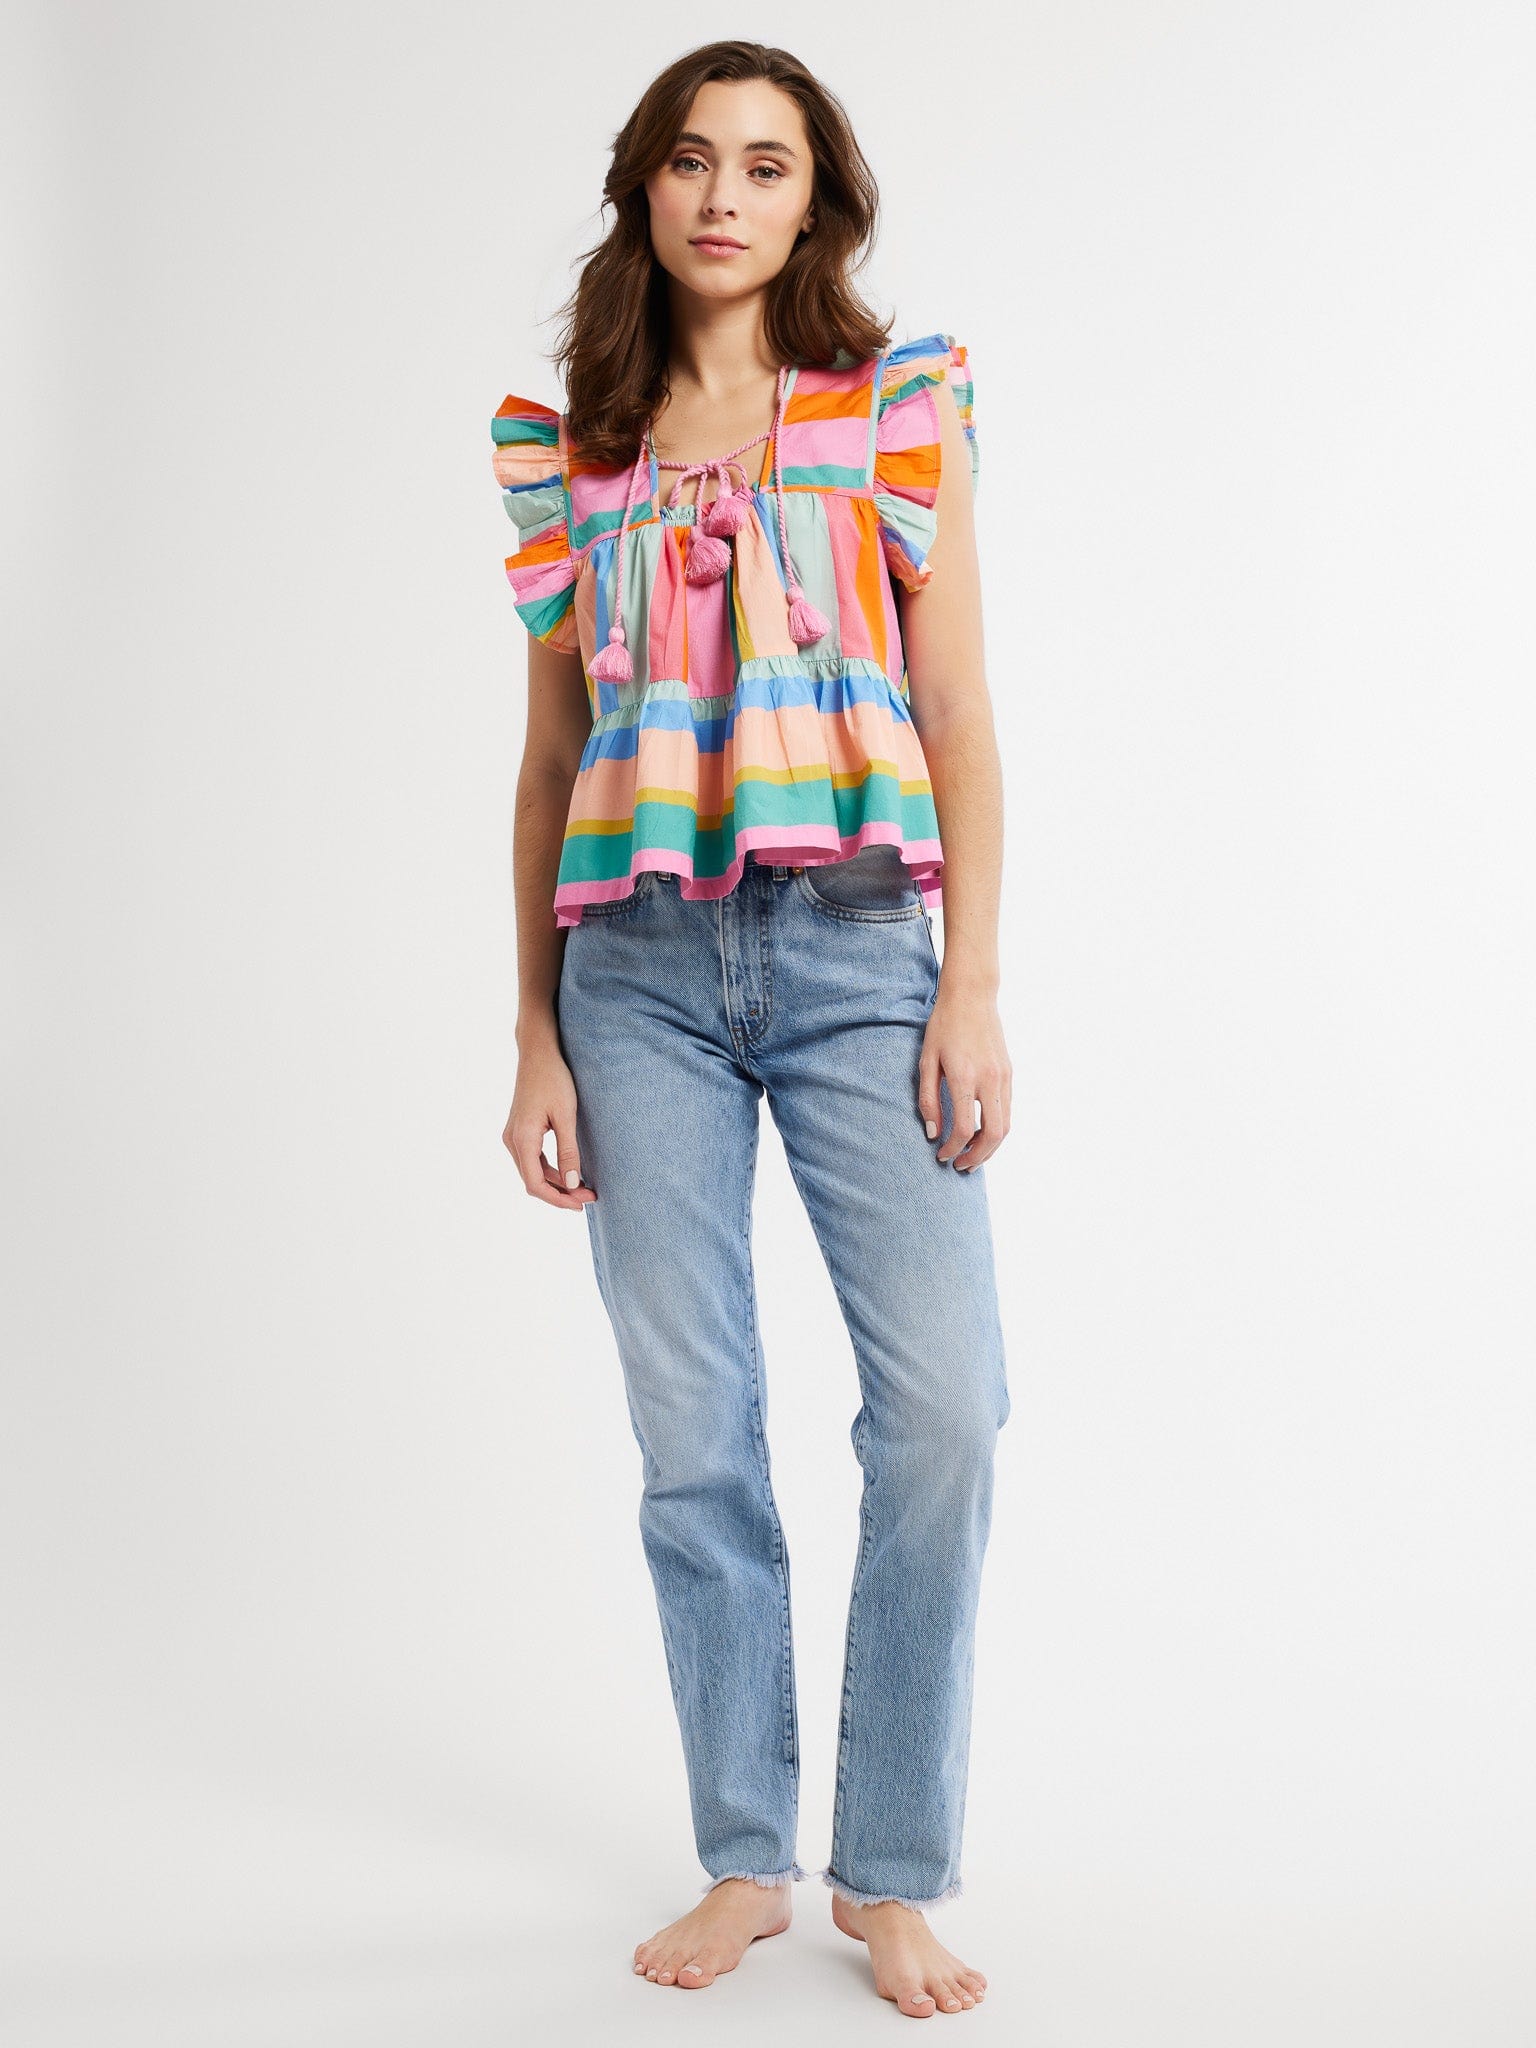 MILLE Clothing Chelsea Top in Confetti Stripe